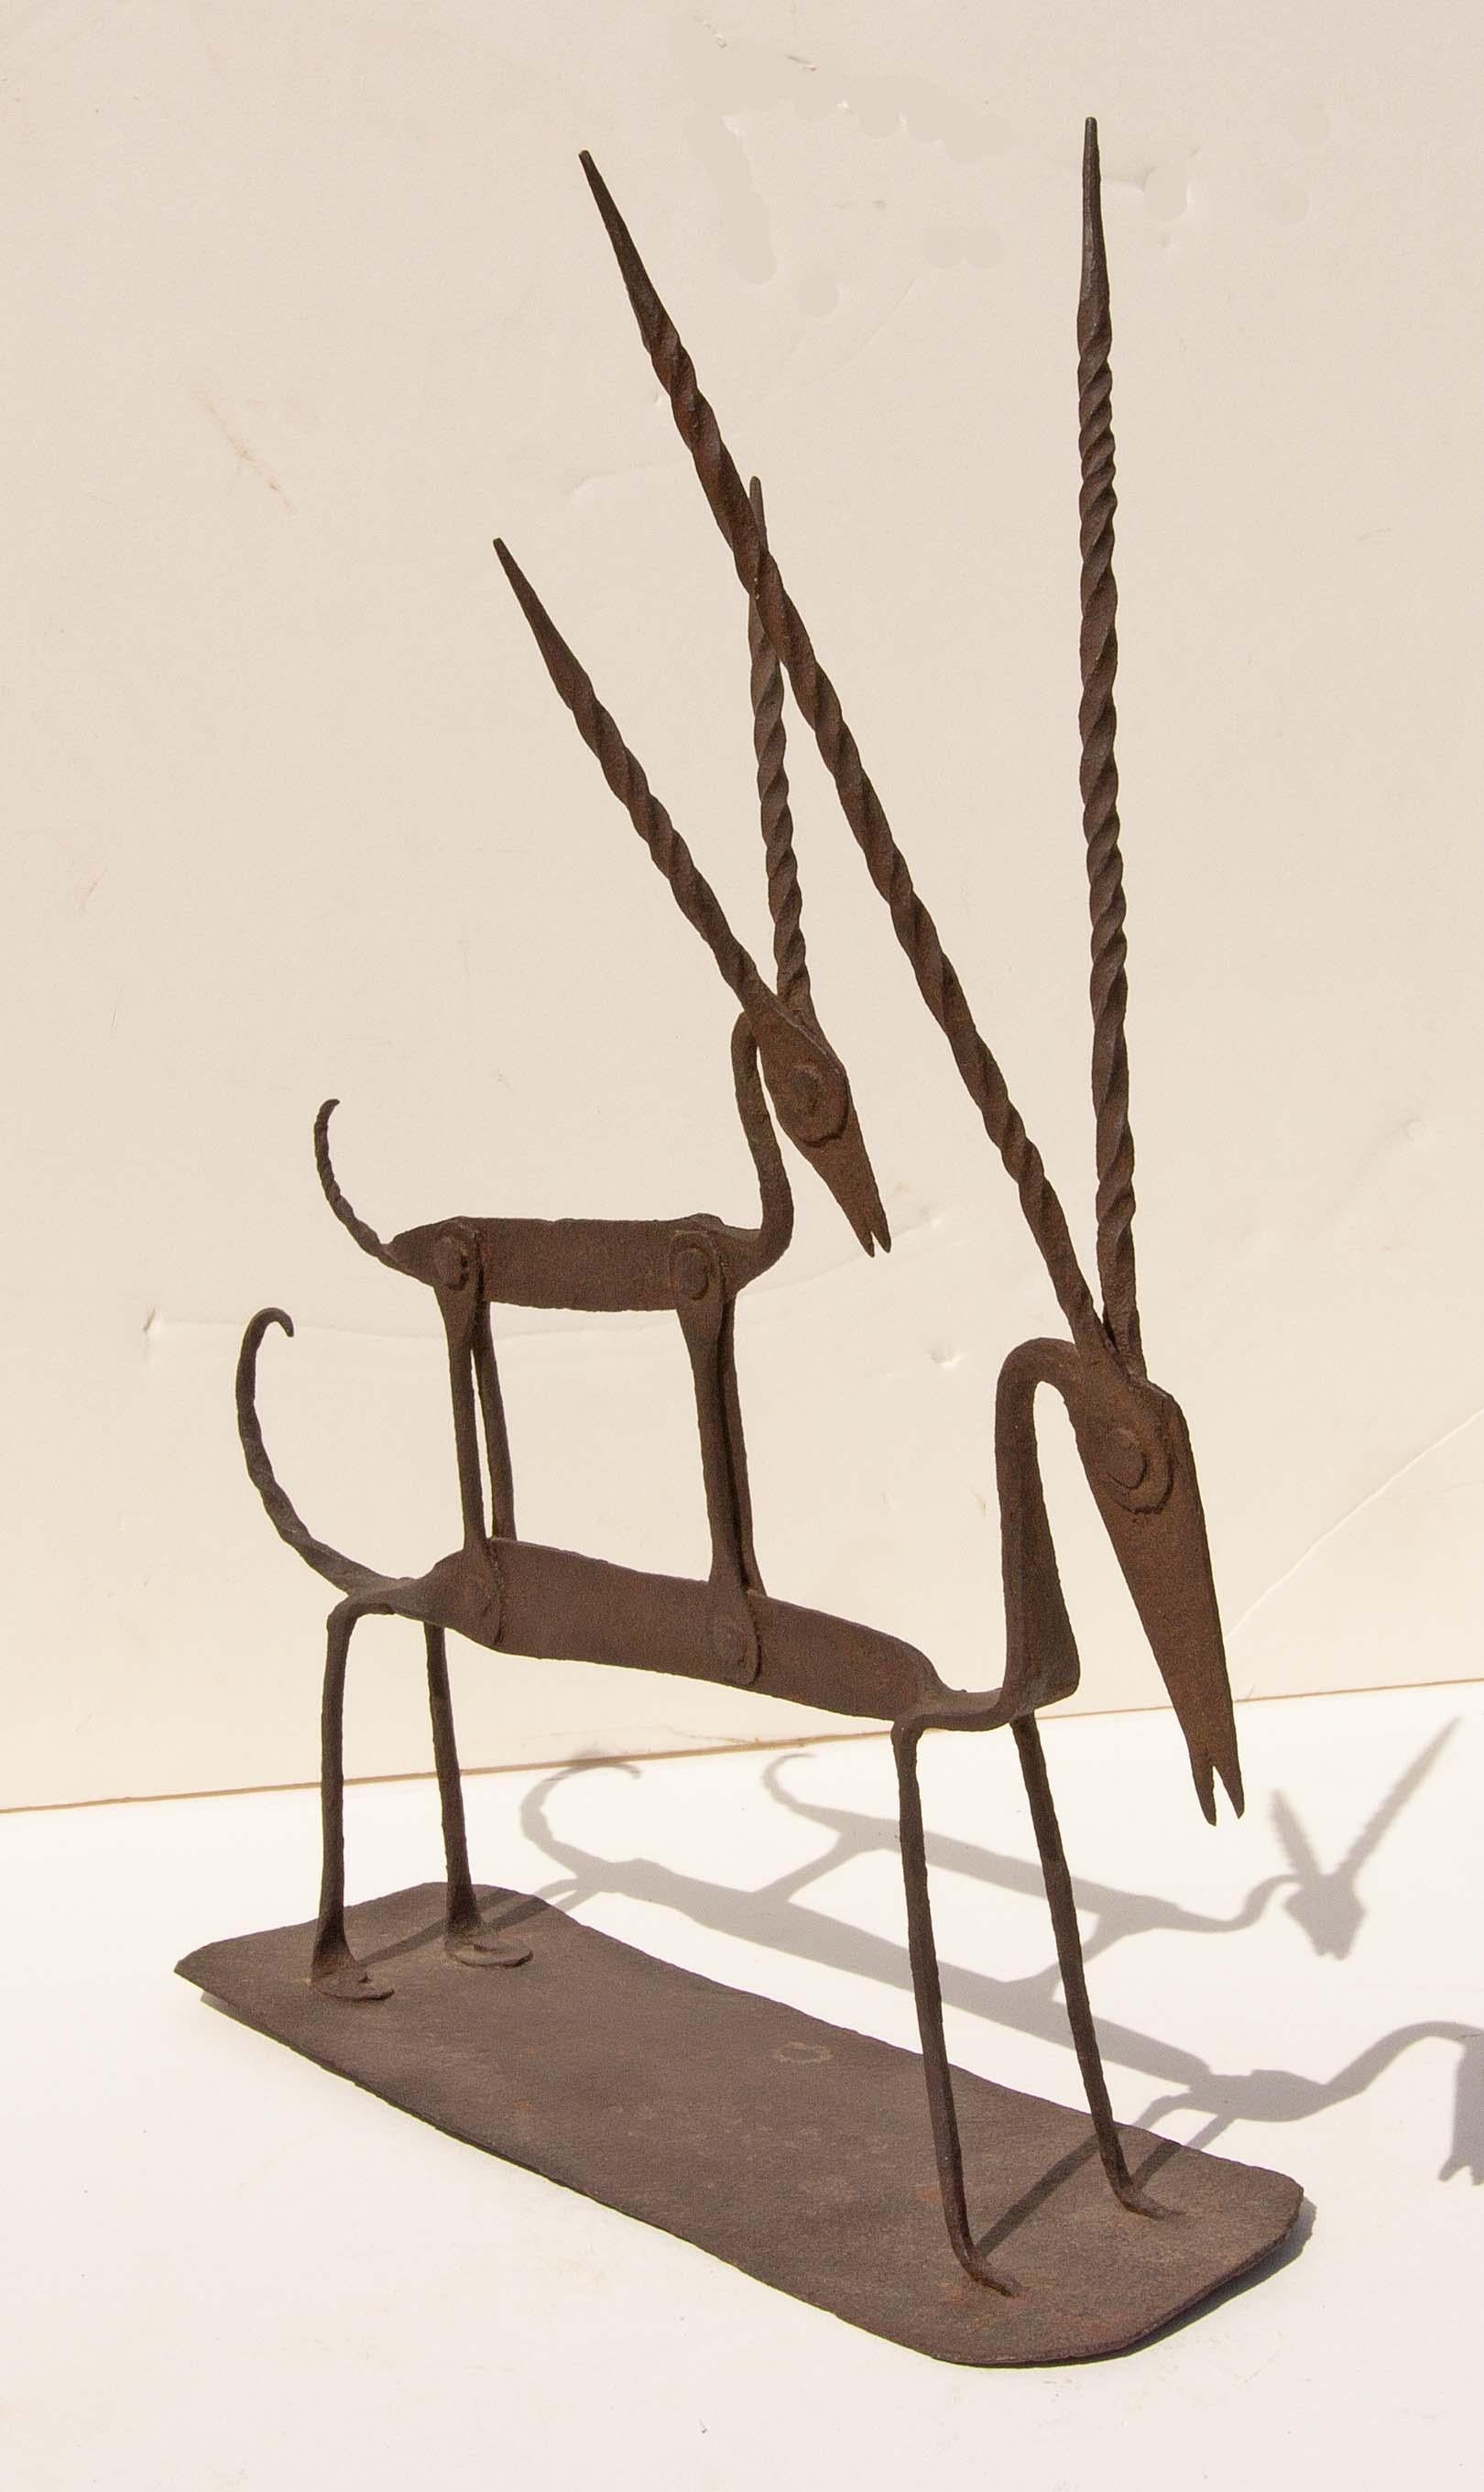 Iron African Style Gazelle Sculpture - Brown Abstract Sculpture by Unknown